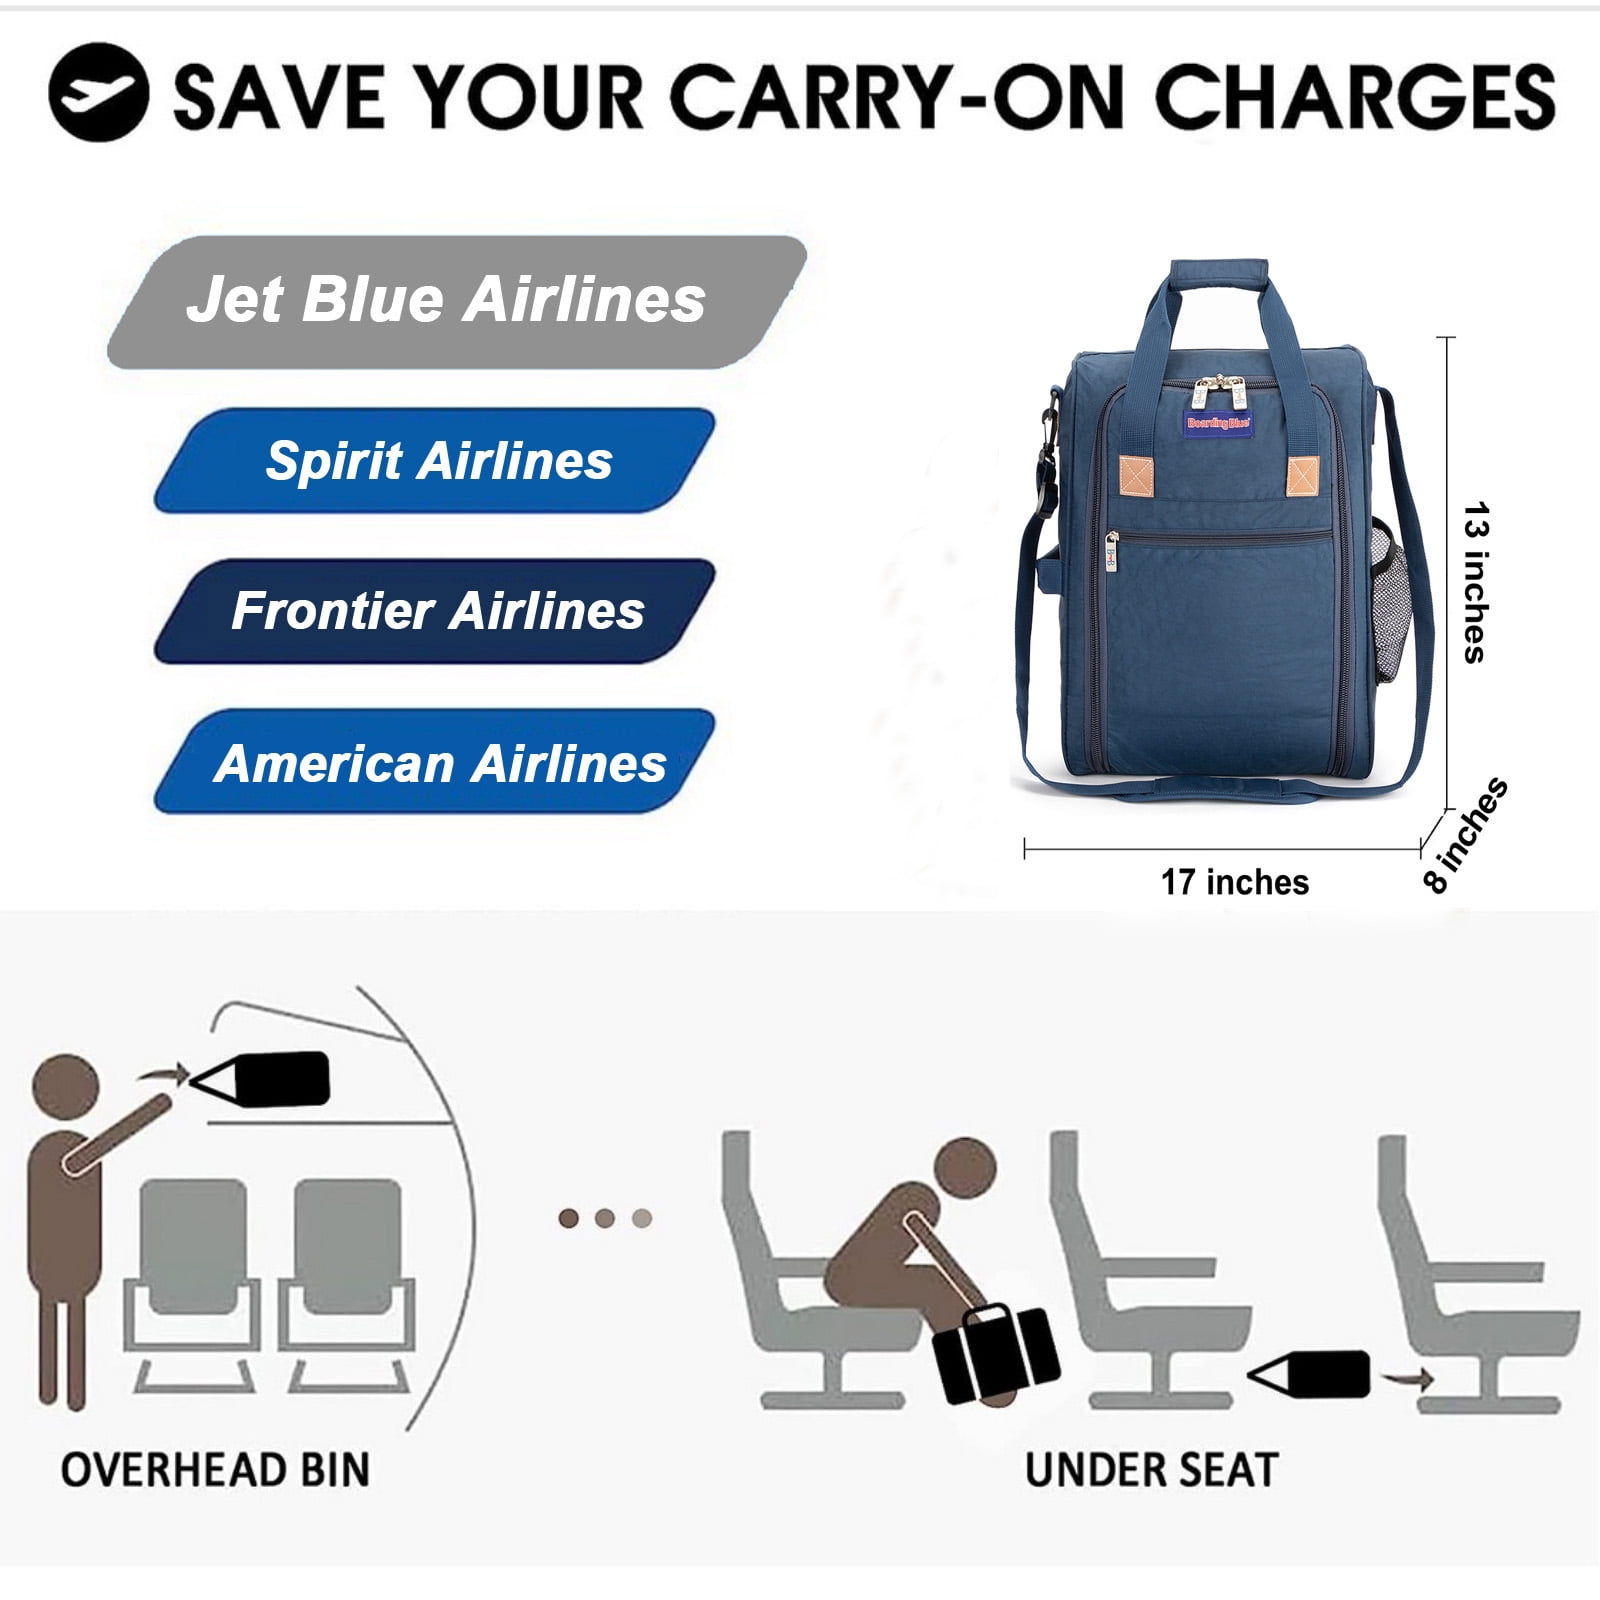 BoardingBlue for The Spirit Frontier American Jetblue 17 Inches Personal Item Under Seat Duffel Bag (Black), Adult Unisex, Size: 17 x 13 x 8